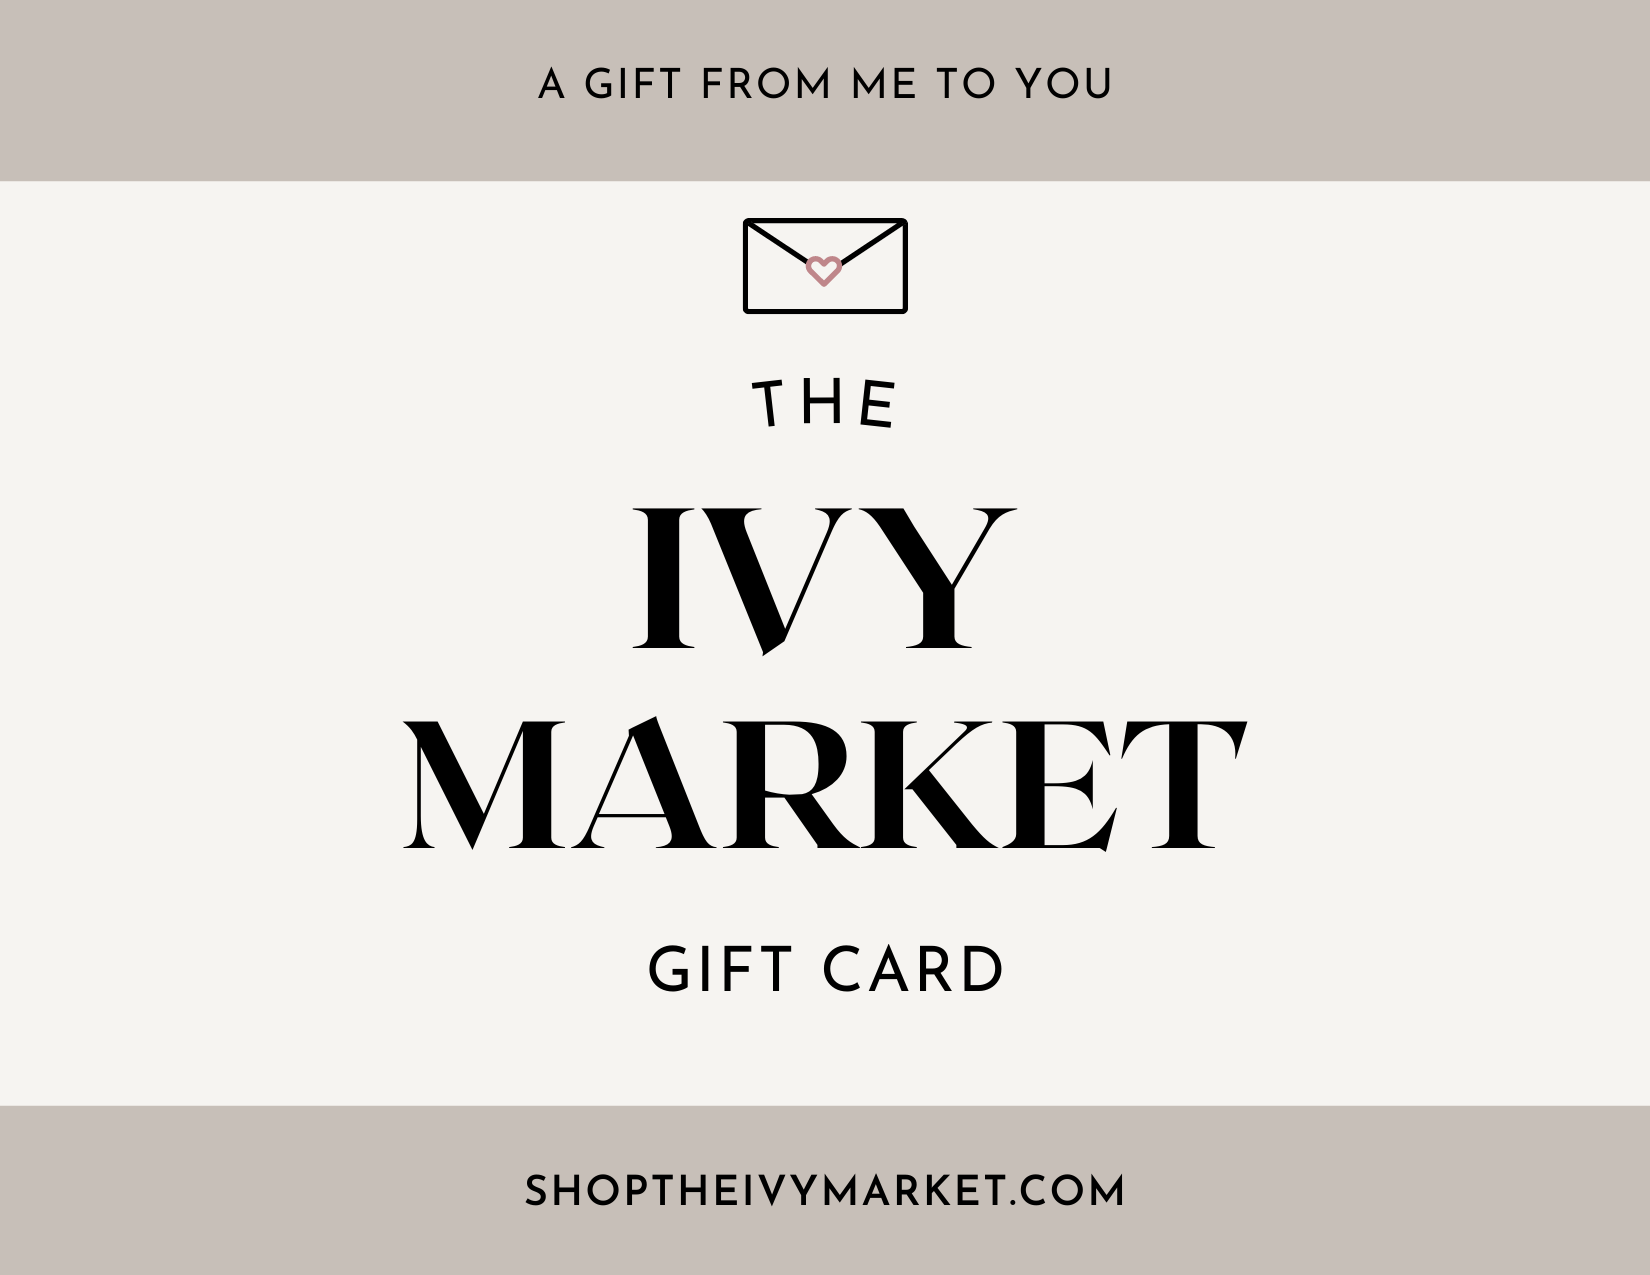 The Ivy Market Gift Card